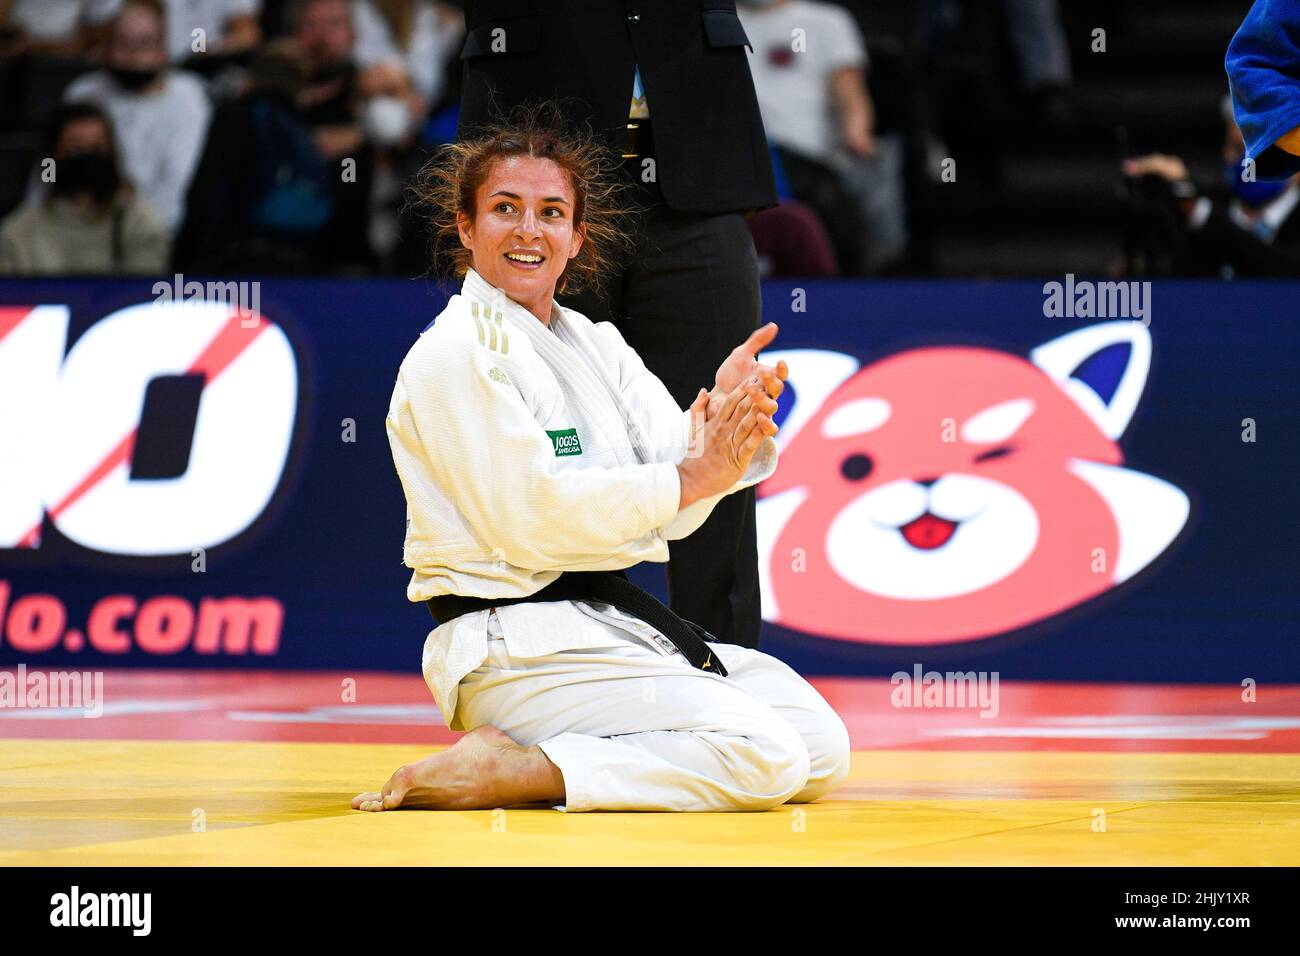 Women -63 kg, Barbara TIMO of Portugal gold medal competes during the Paris Grand Slam 2021, Judo event on October 16, 2021 at AccorHotels Arena in Pa Stock Photo